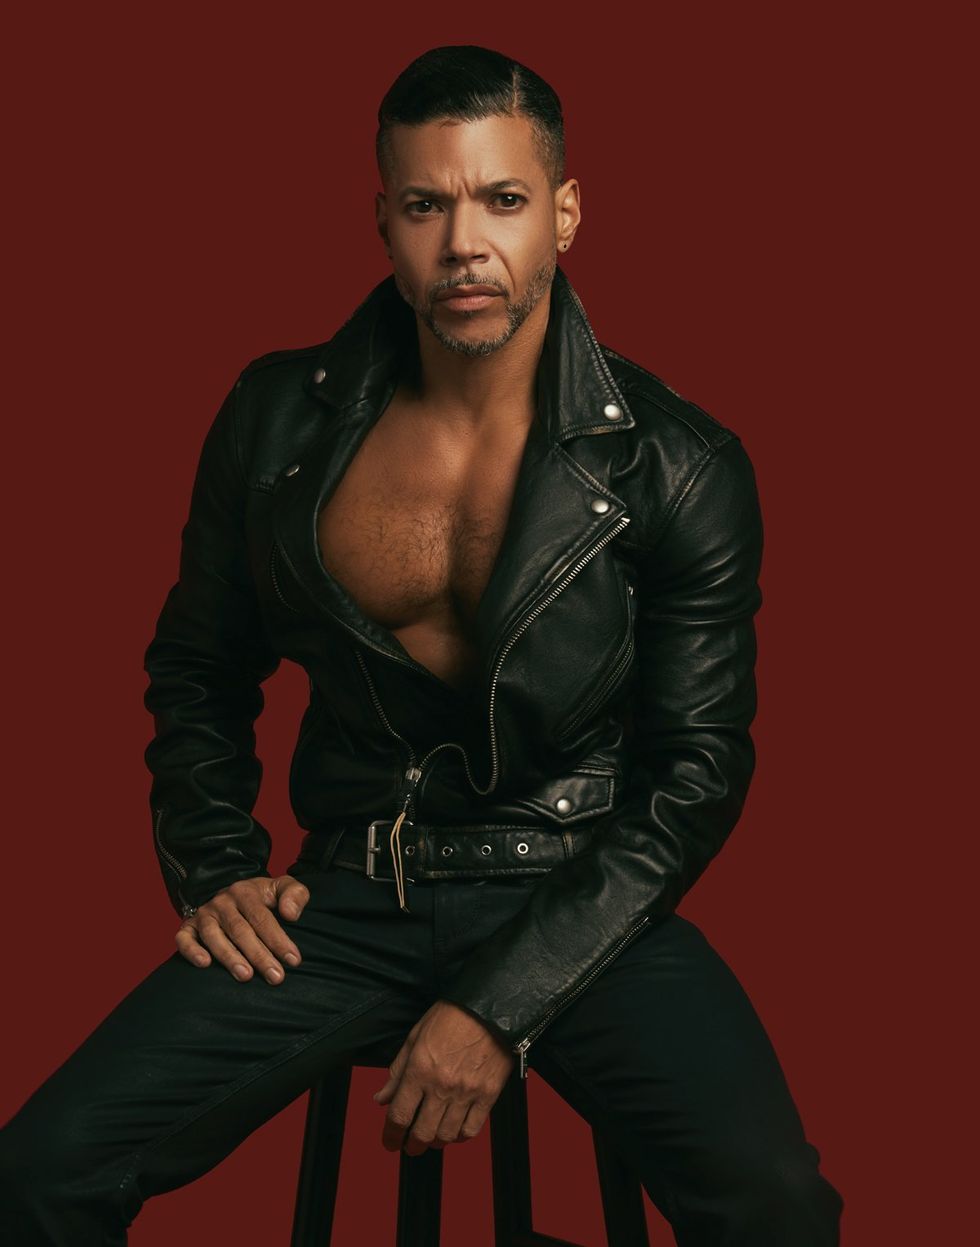 Photo Gallery Q&A: Meet NYC based gay celebrity photographer Mike Ruiz and his LGBTQ+ subjects Wilson Cruz